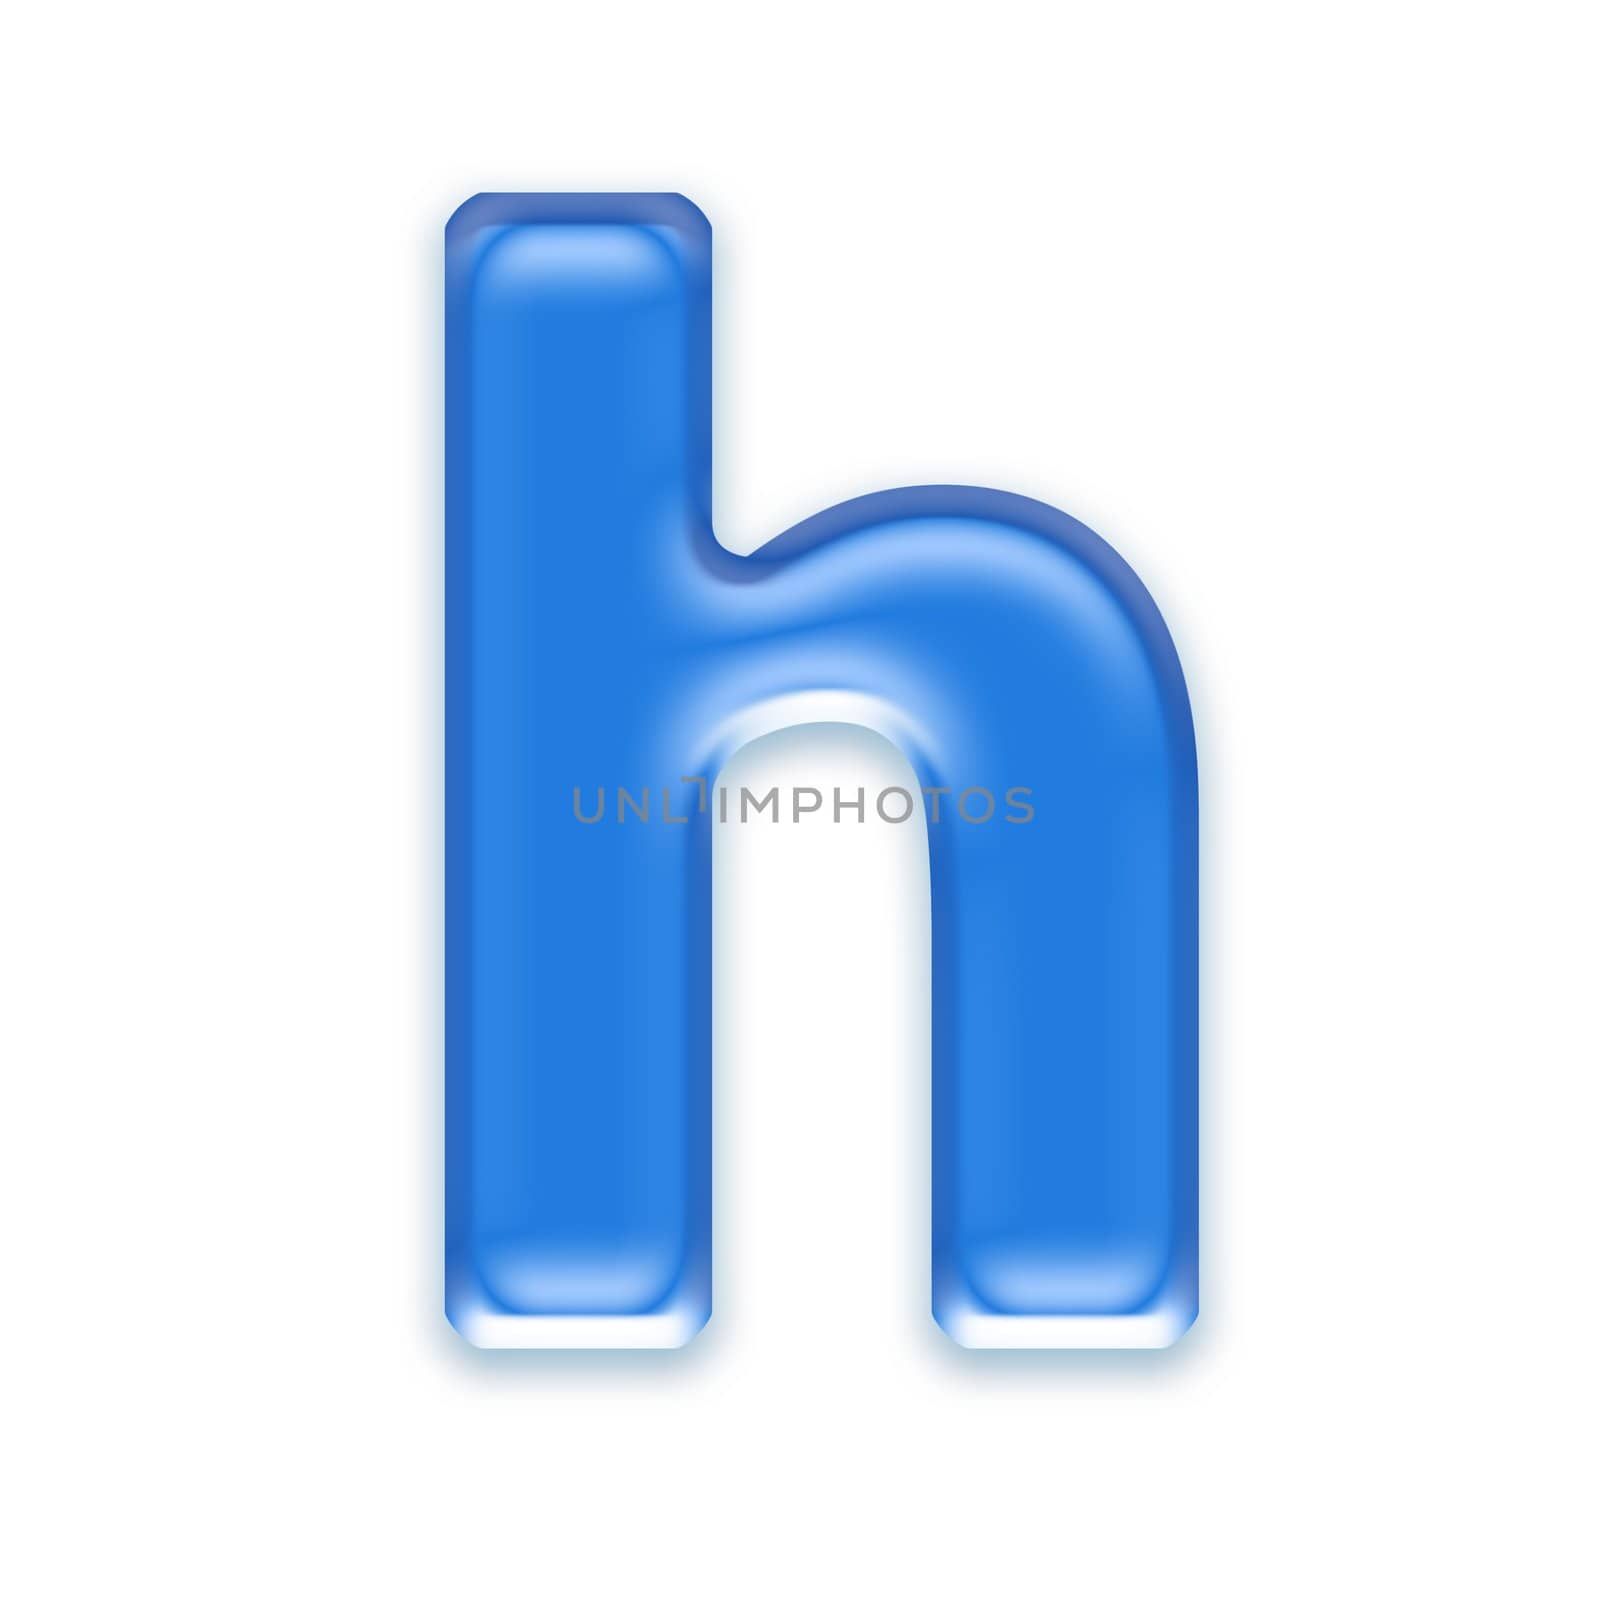 Aqua letter isolated on white background  - h by chrisroll